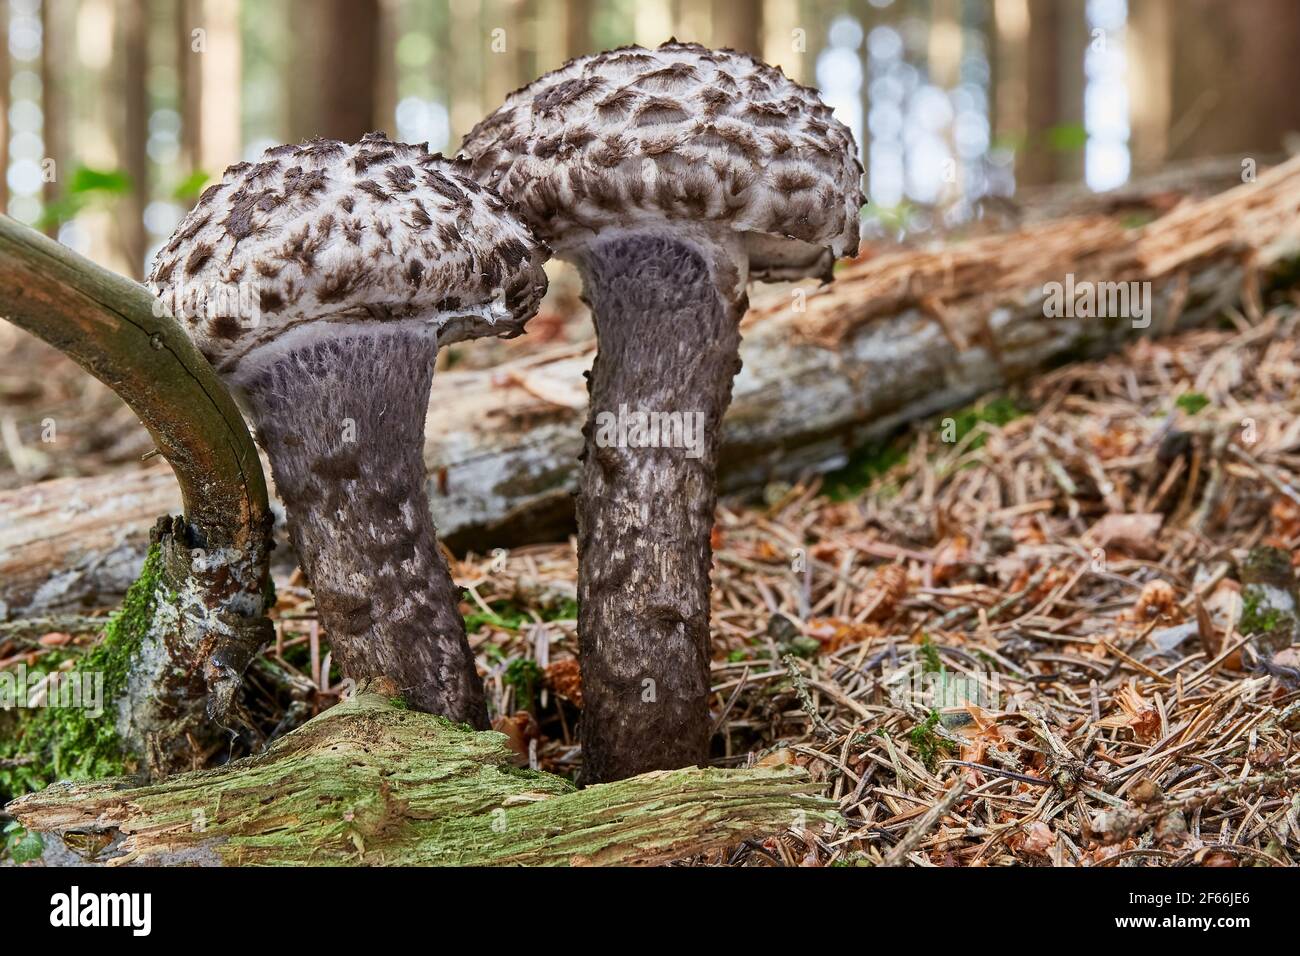 Strobilomyces floccopus - edible mushroom. Fungus in the natural environment. English: old man of the woods. Czech: Siskovec cerny Stock Photo